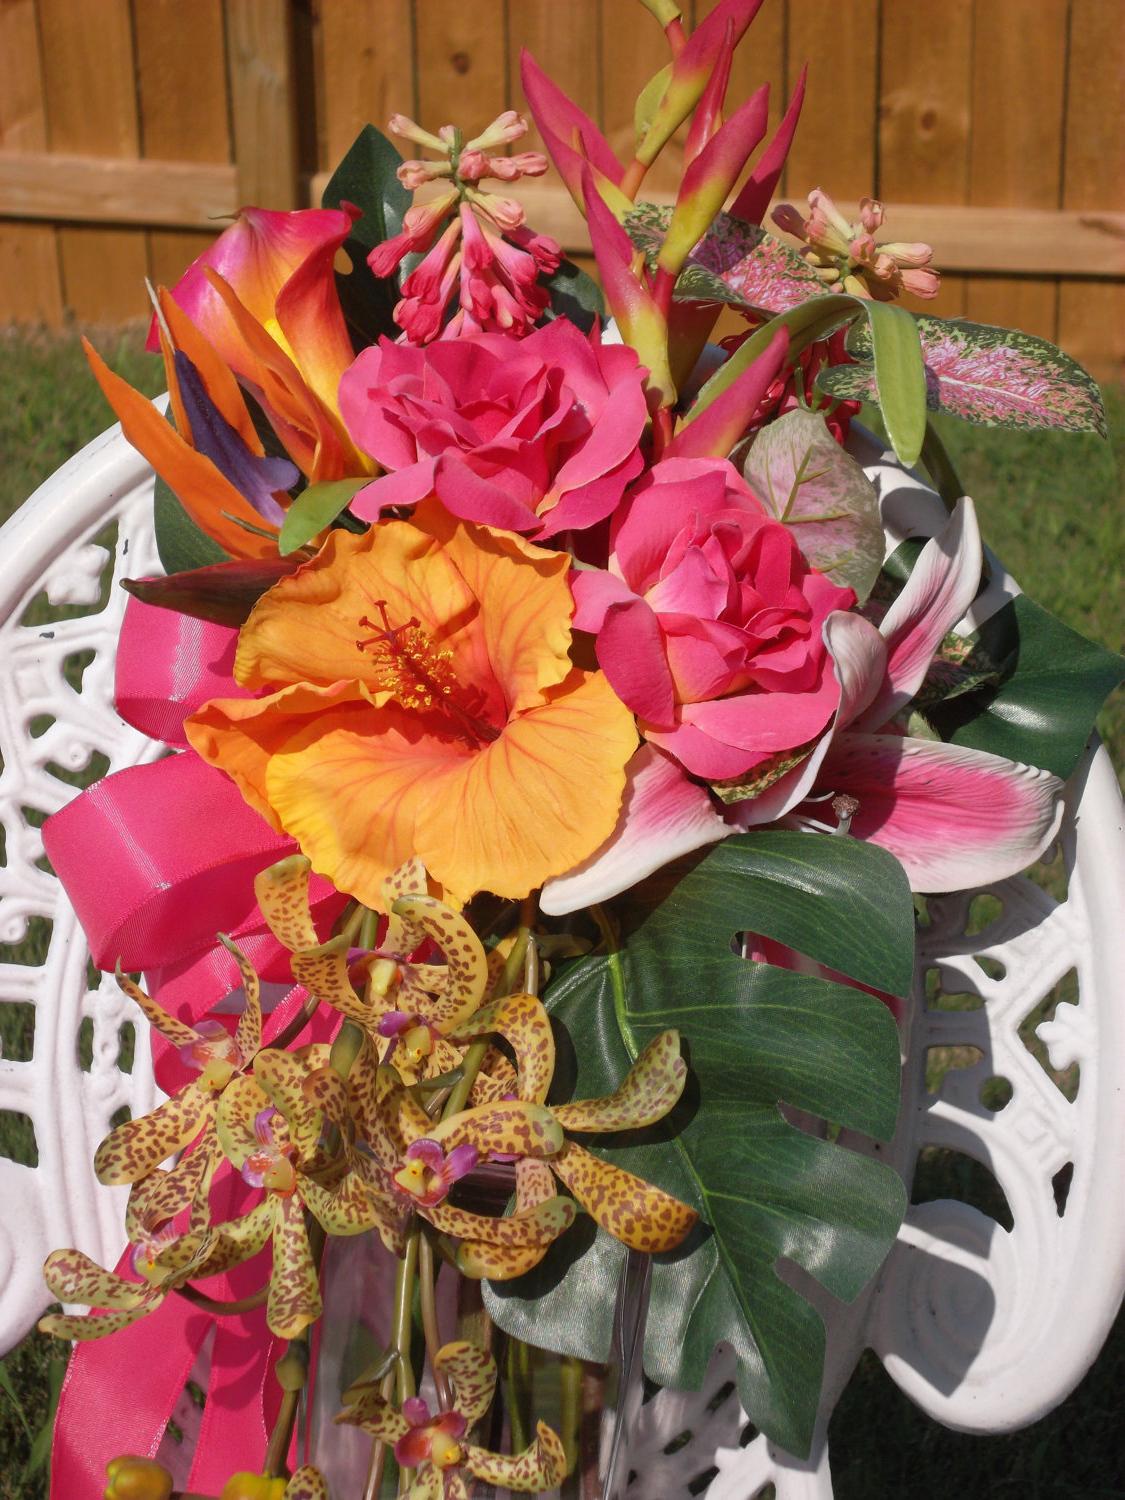 SALE-Tropical Pink and Orange Wedding Bouquet With Free Boutonniere